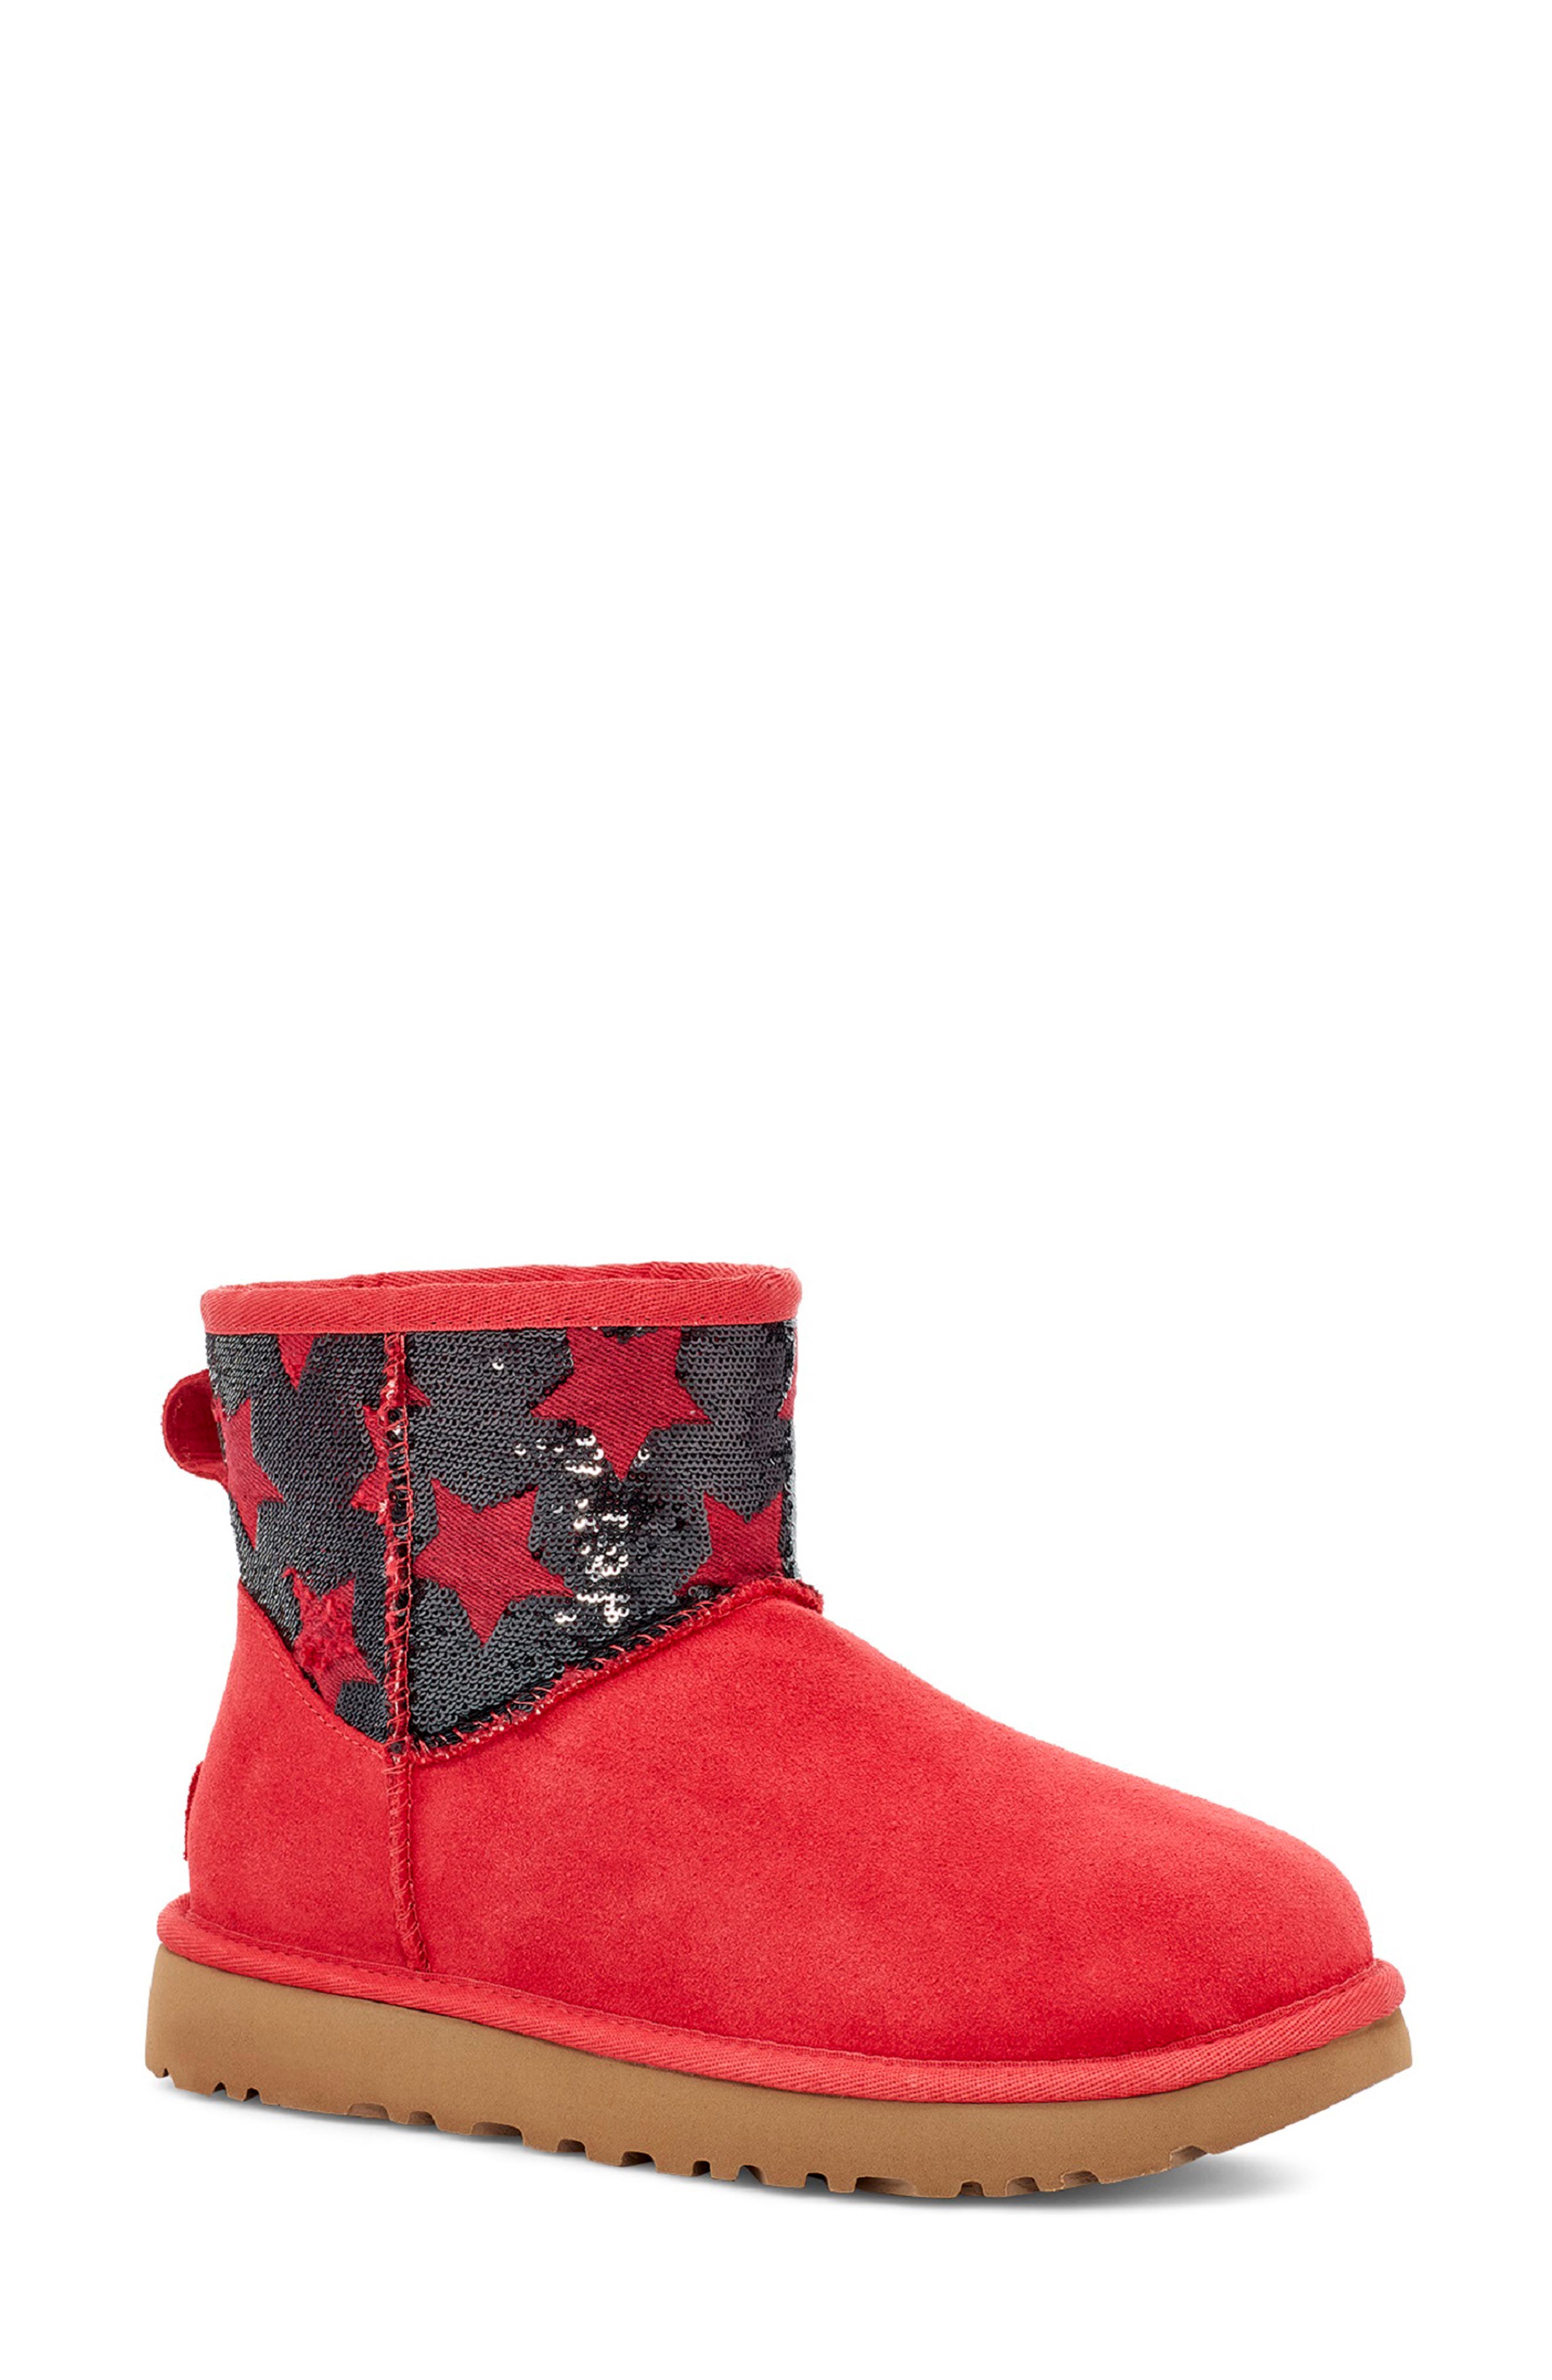 ugg red sequin boots